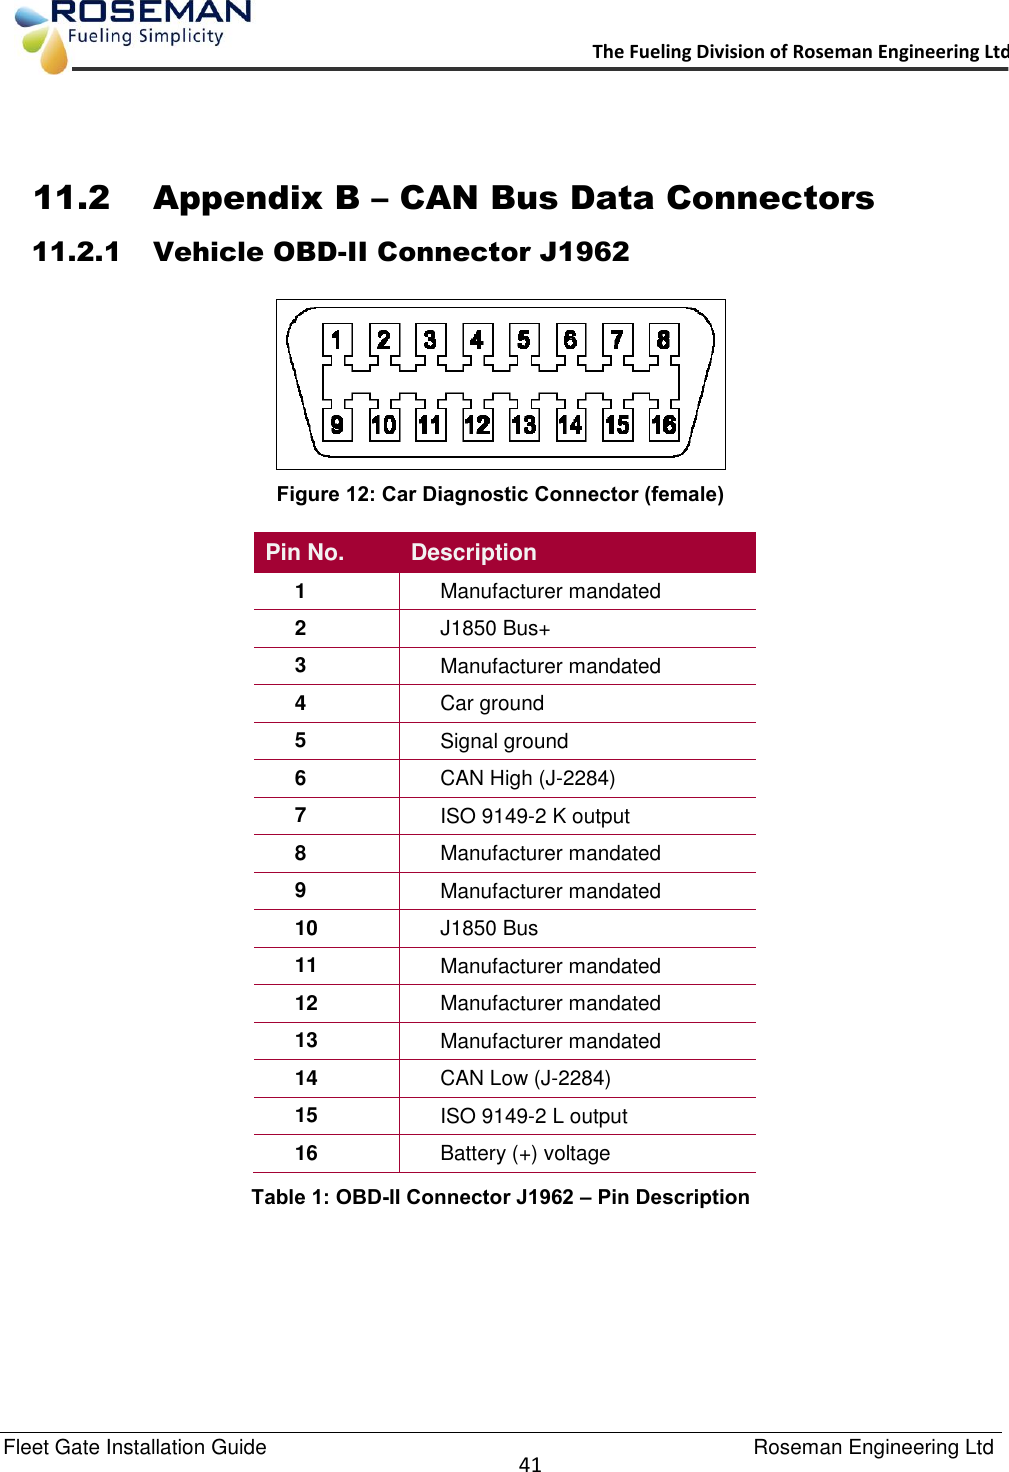   Fleet Gate Installation Guide                                                                                    Roseman Engineering Ltd  41      The Fueling Division of Roseman Engineering Ltd.                                                                  11.2 Appendix B – CAN Bus Data Connectors 11.2.1 Vehicle OBD-II Connector J1962  Figure 12: Car Diagnostic Connector (female) Pin No. Description 1 Manufacturer mandated 2 J1850 Bus+ 3 Manufacturer mandated 4 Car ground 5 Signal ground 6 CAN High (J-2284) 7 ISO 9149-2 K output 8 Manufacturer mandated 9 Manufacturer mandated 10 J1850 Bus 11 Manufacturer mandated 12 Manufacturer mandated 13 Manufacturer mandated 14 CAN Low (J-2284) 15 ISO 9149-2 L output 16 Battery (+) voltage Table 1: OBD-II Connector J1962 – Pin Description    